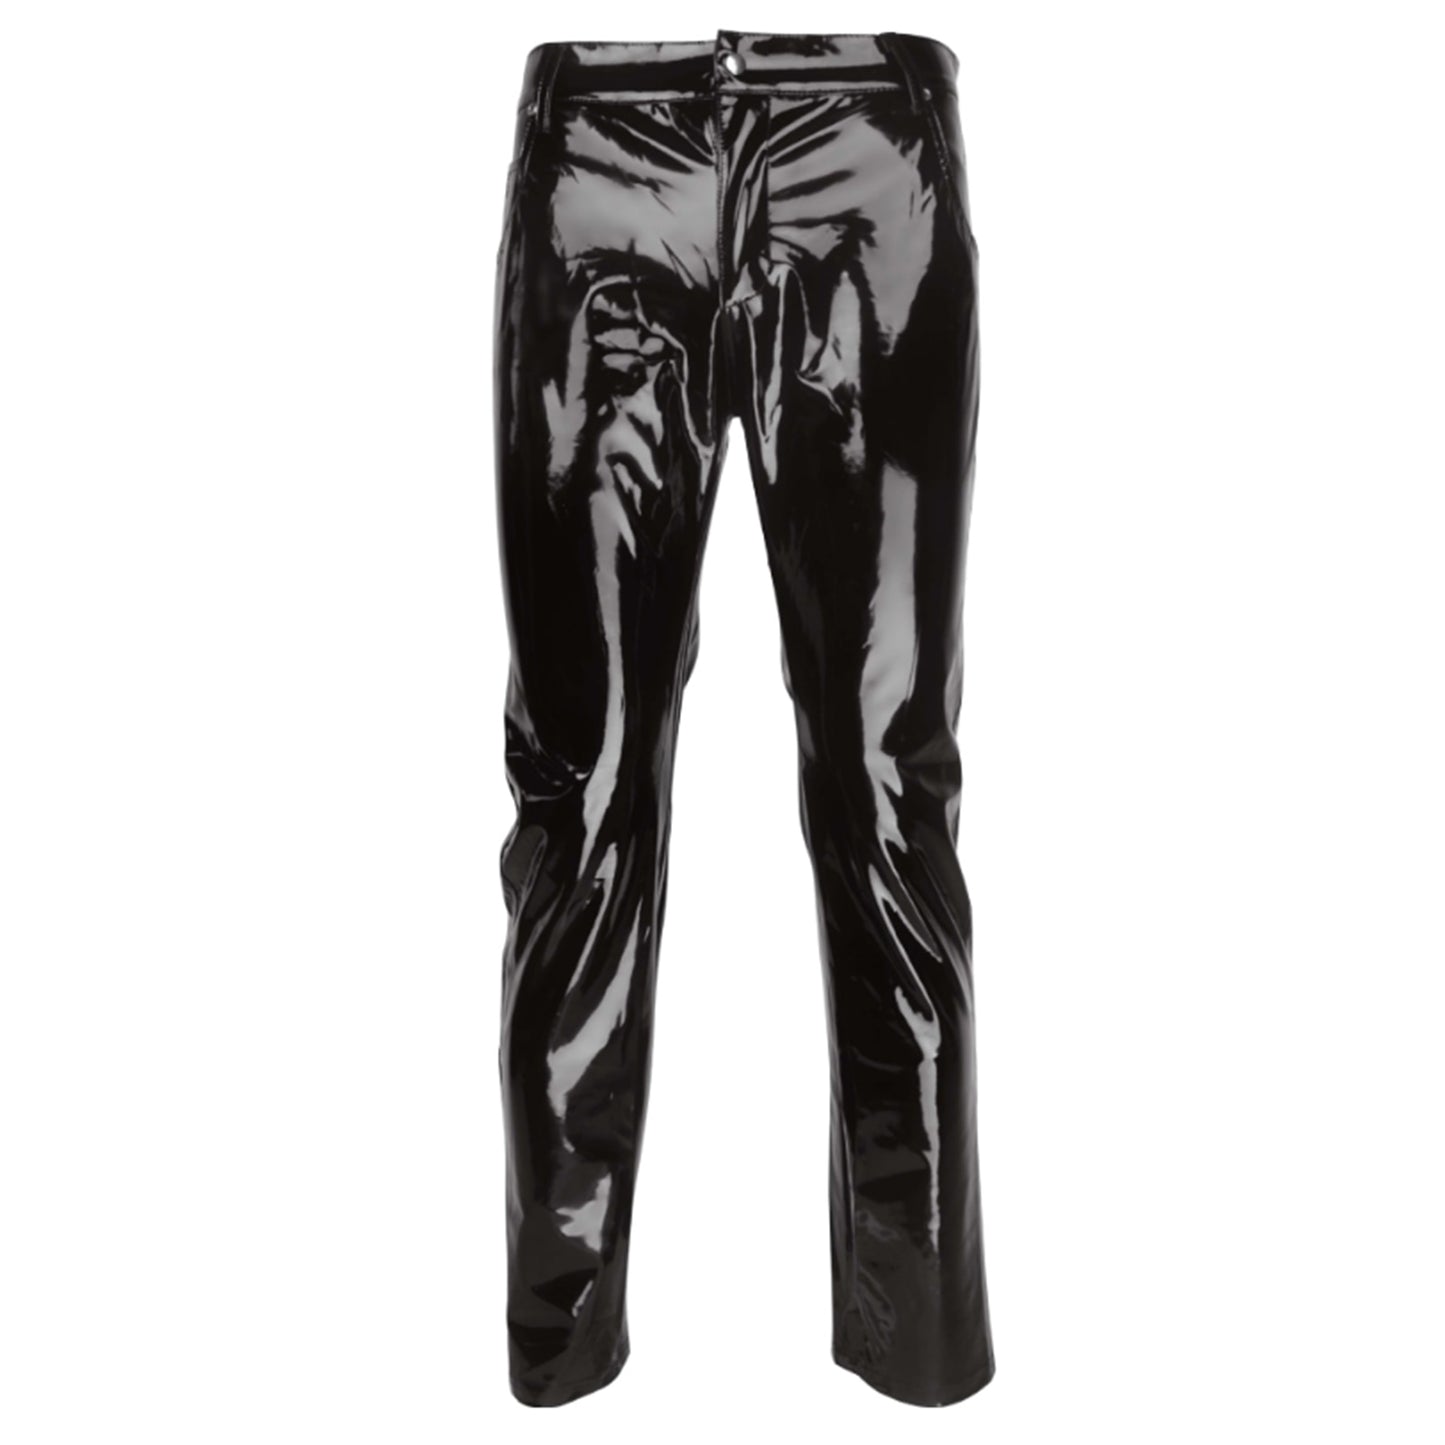 Rock and Roll-inspired Gothic Faux Leather PVC Pants for a Rebel Look